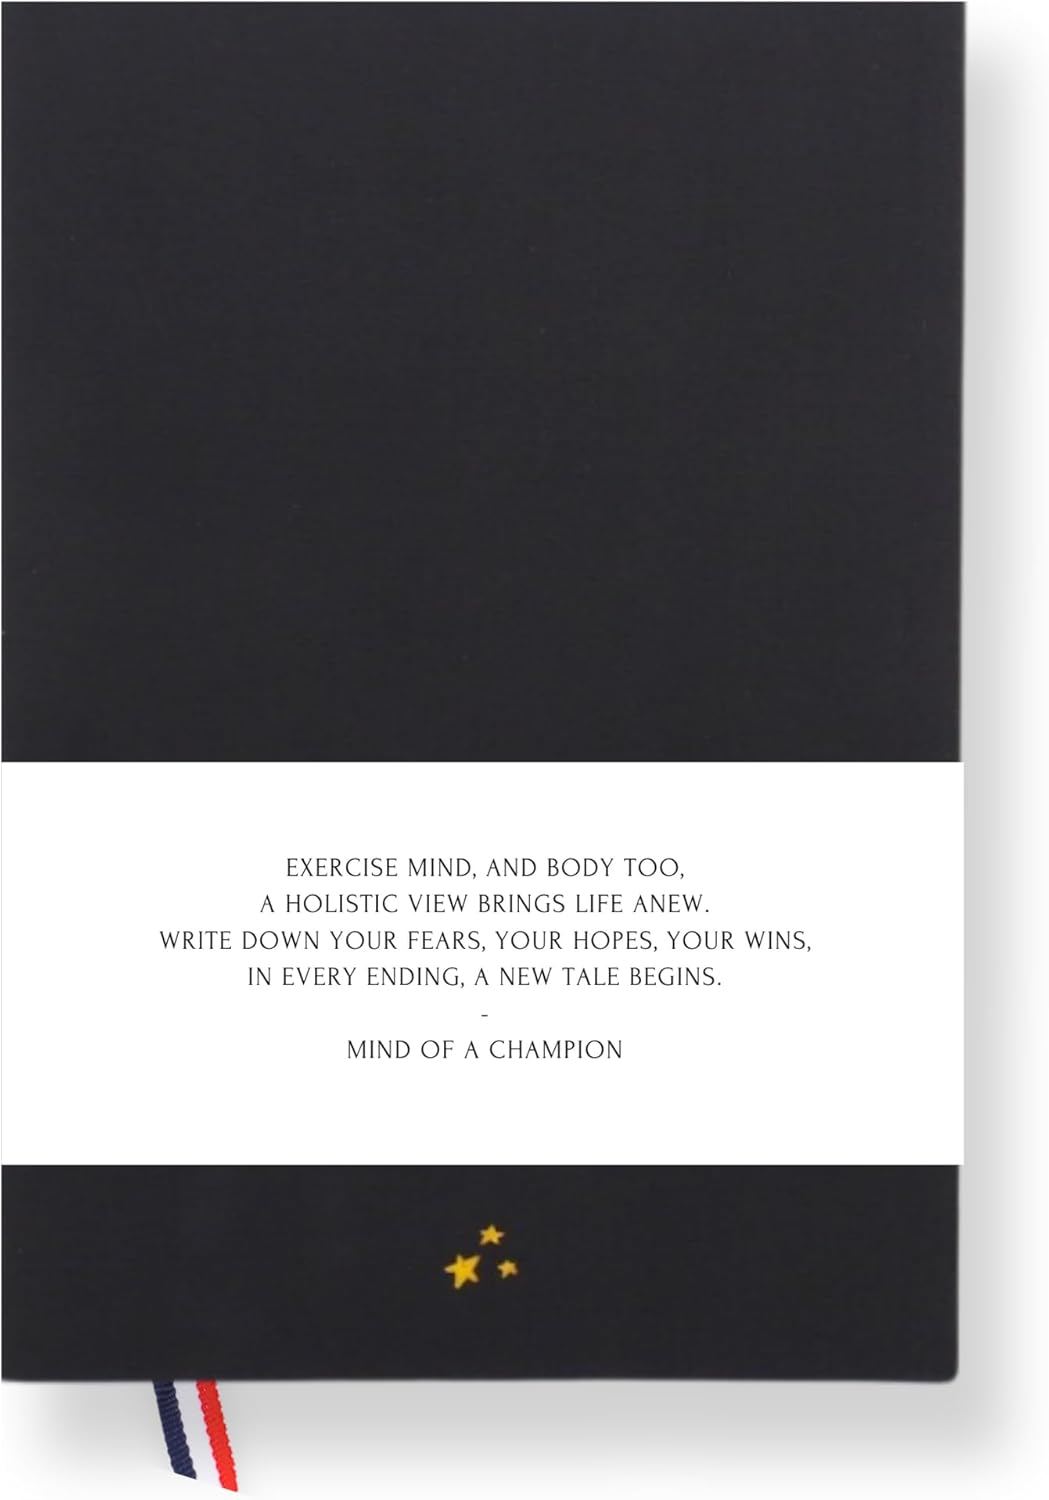 Mind of a Champion - Self-Mastery & Mindfulness Journal for Men